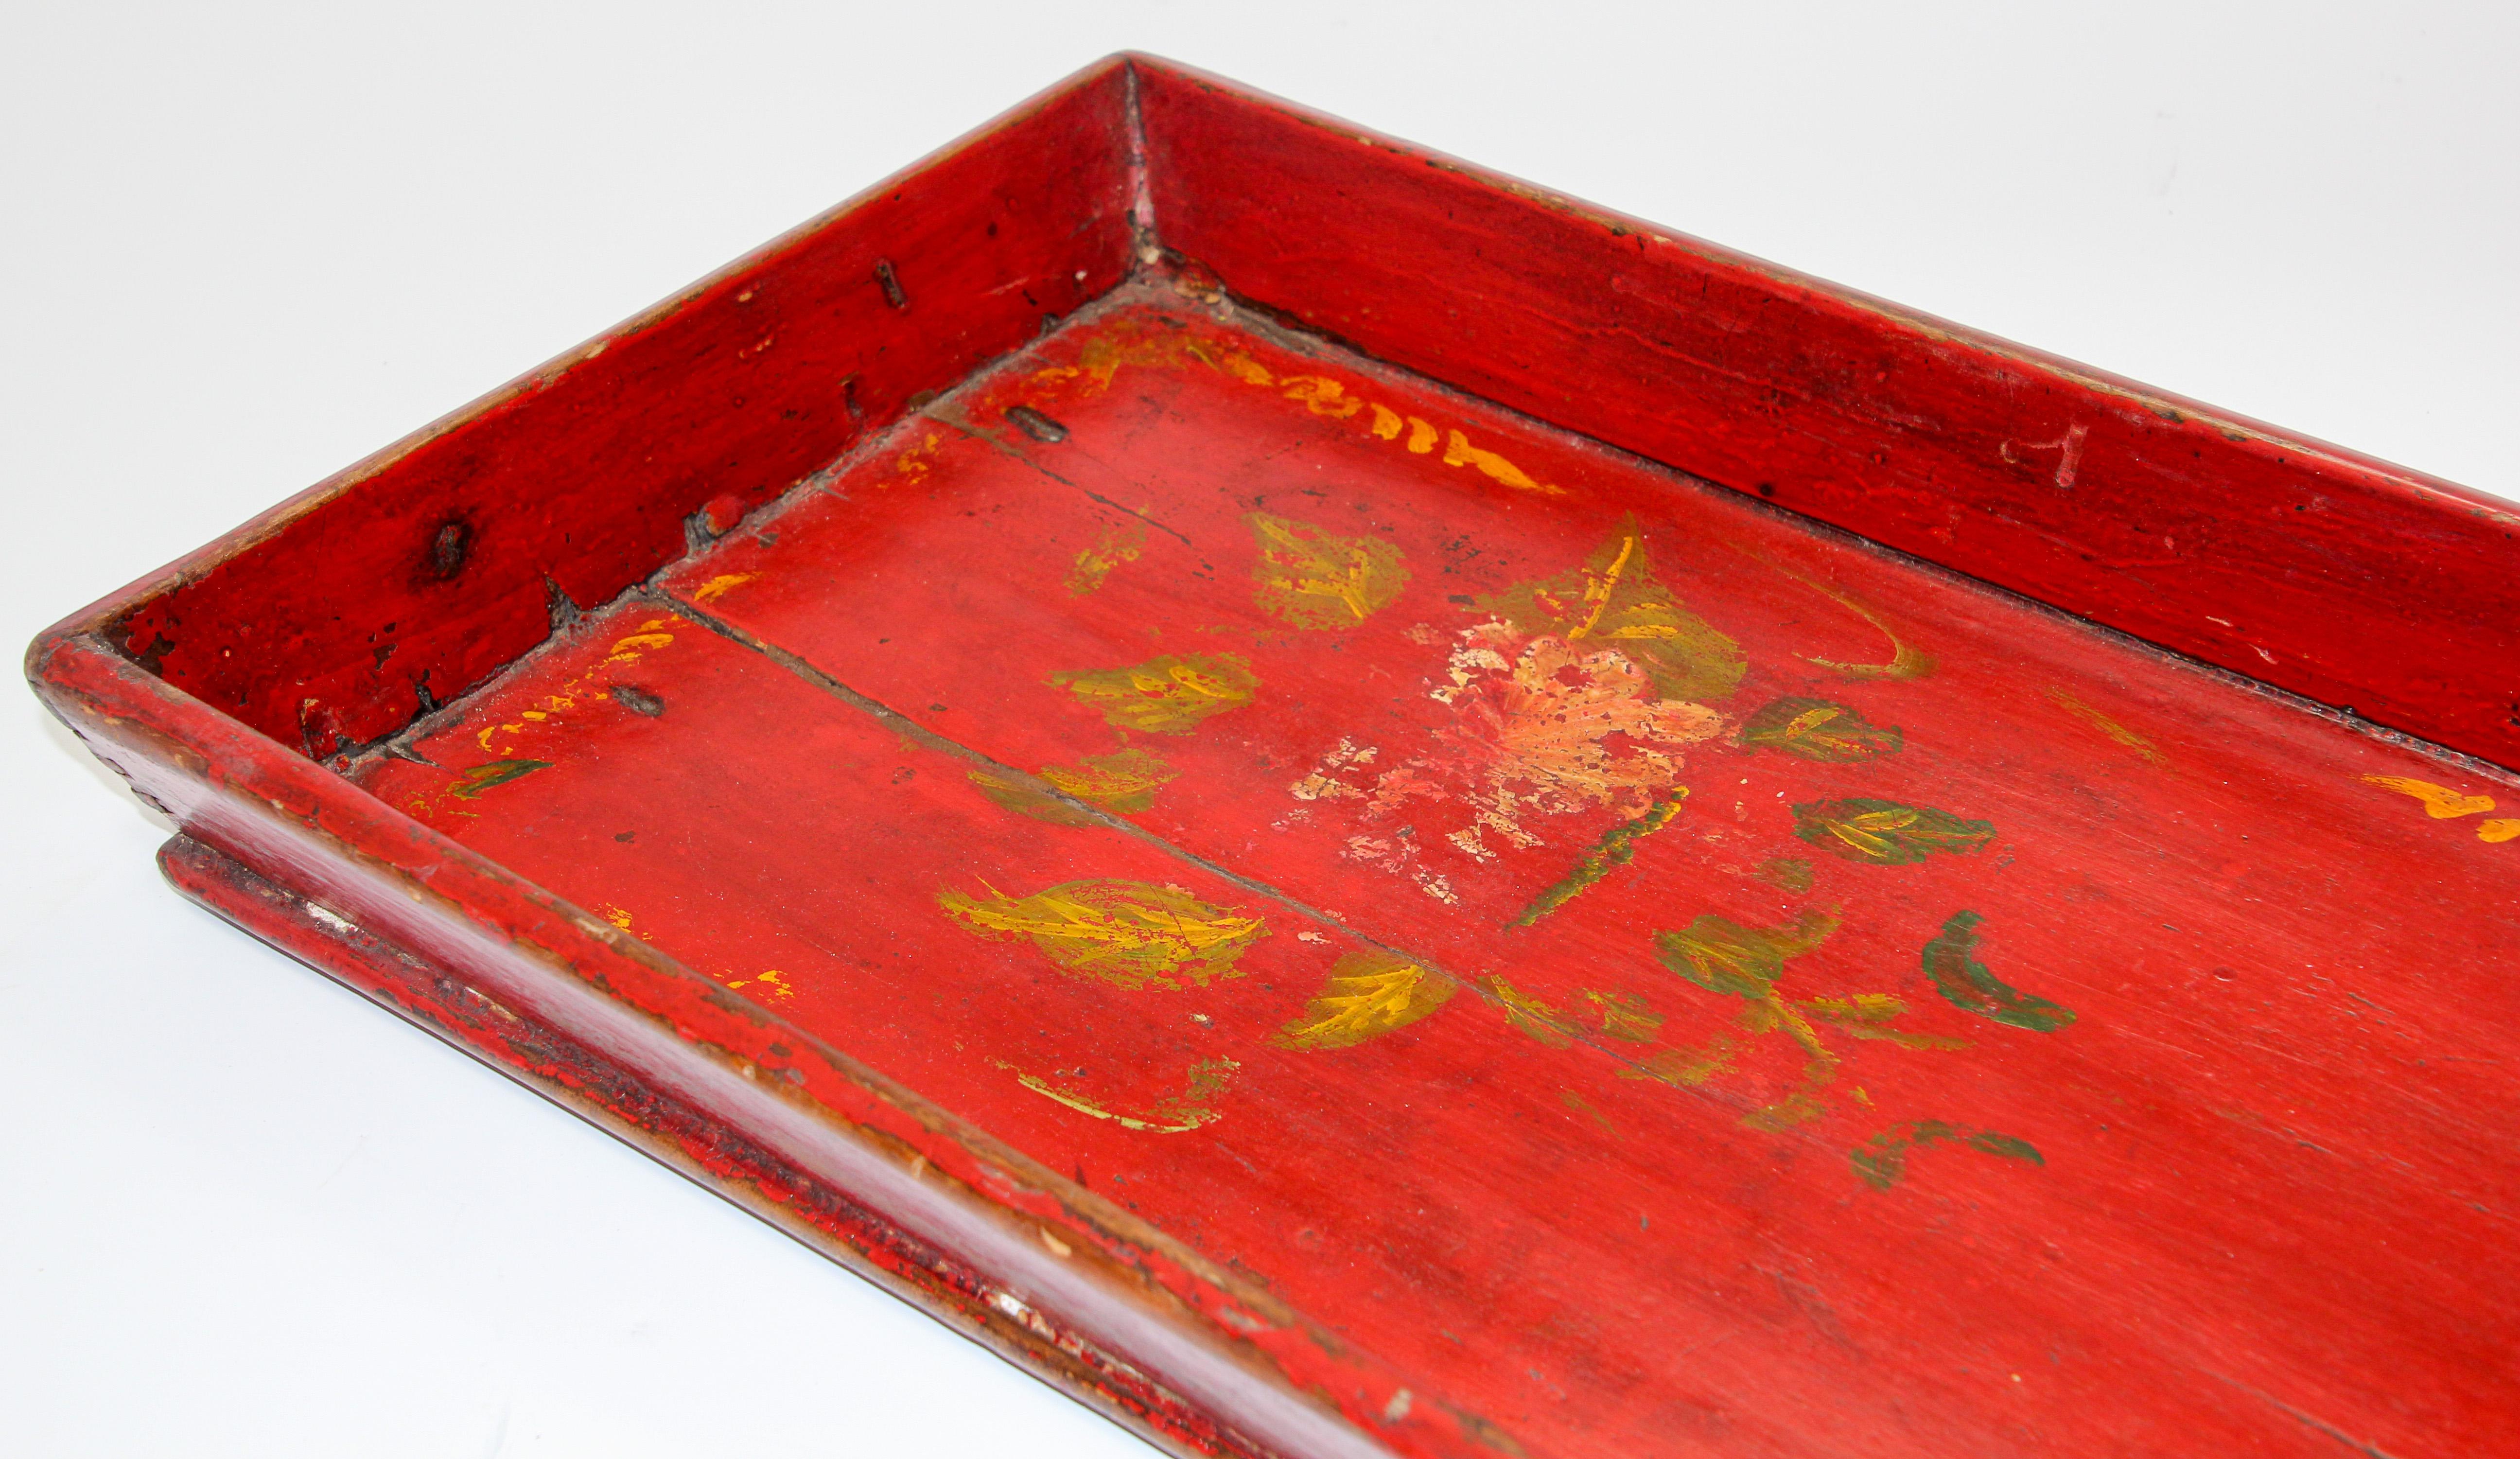 Late 19th century antique wood serving tray hand-painted with flowers on red background.
Worn paint and great patina with floral painted design in red and yellow and green with Chinese calligraphy writing.
Well-constructed and still strong and